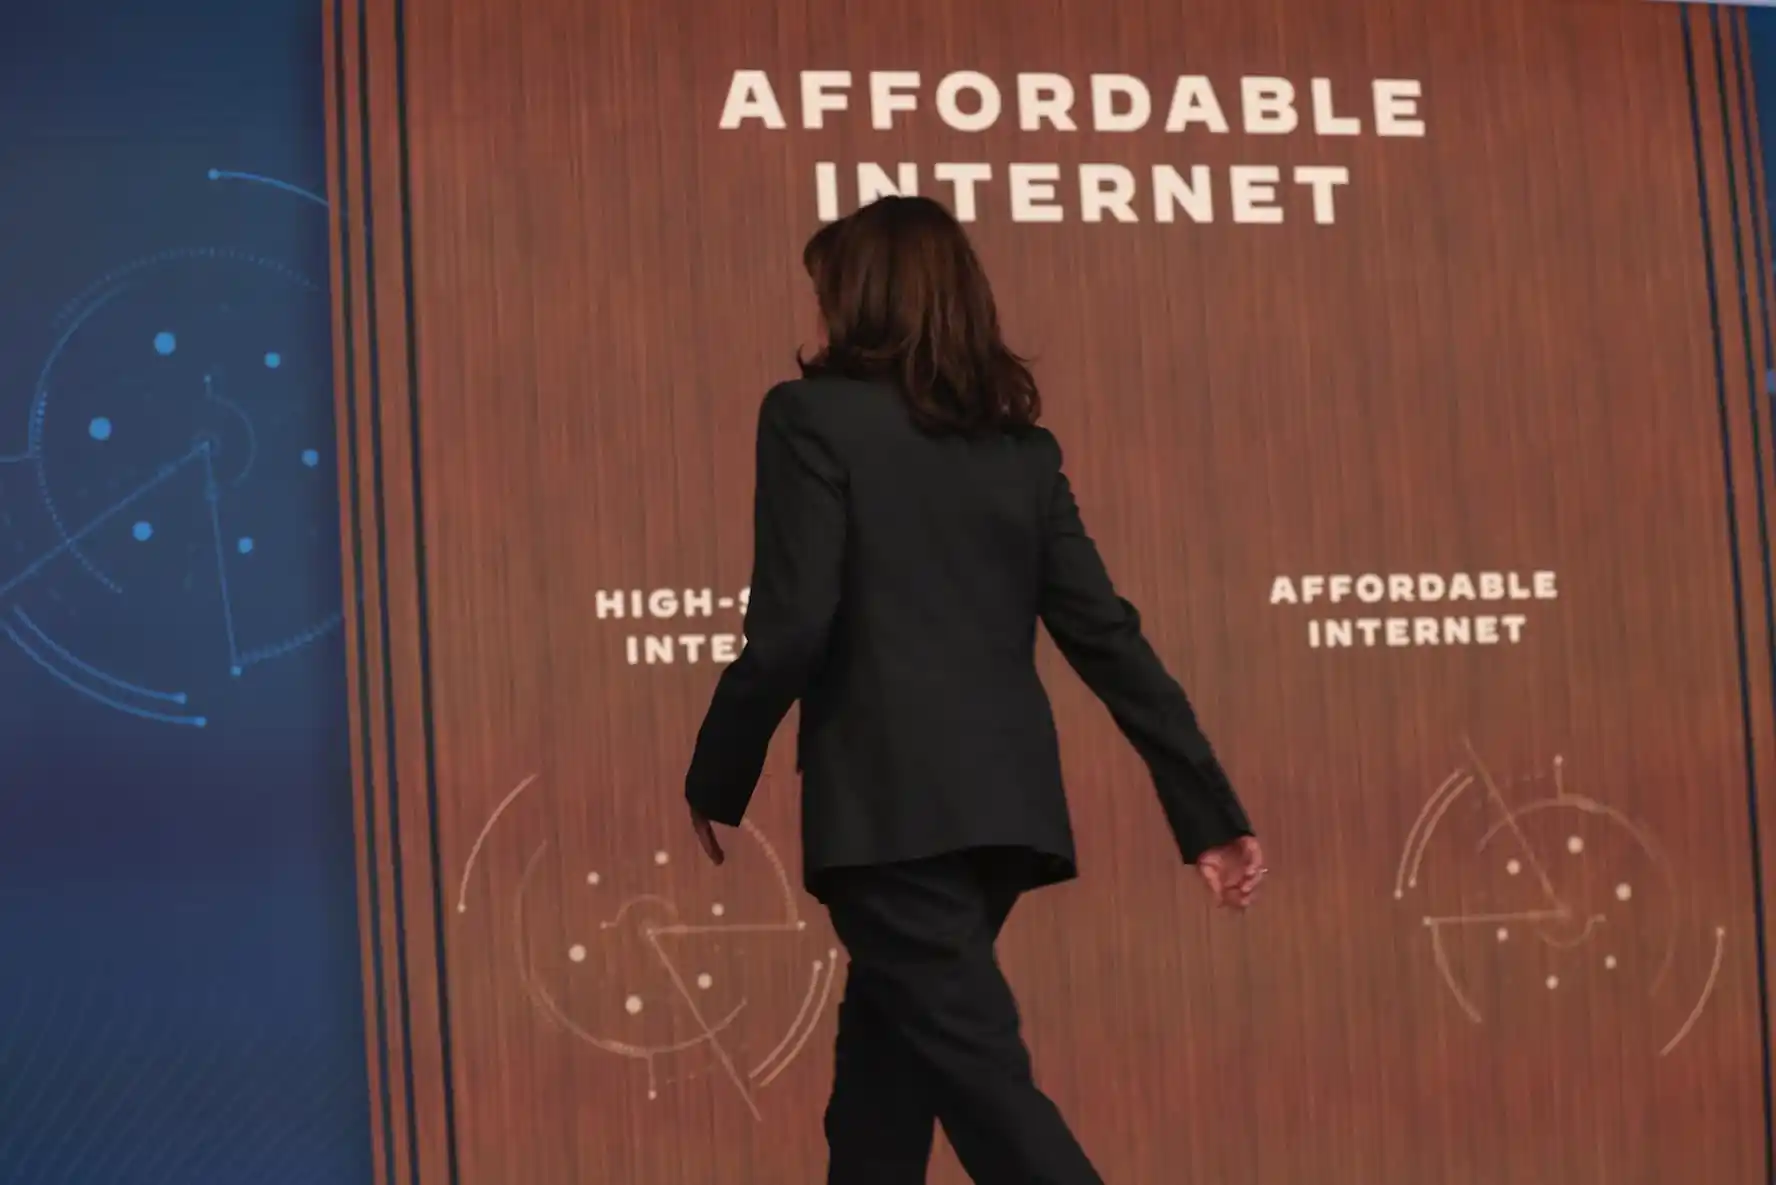 FCC warns their should be affordable internet in US